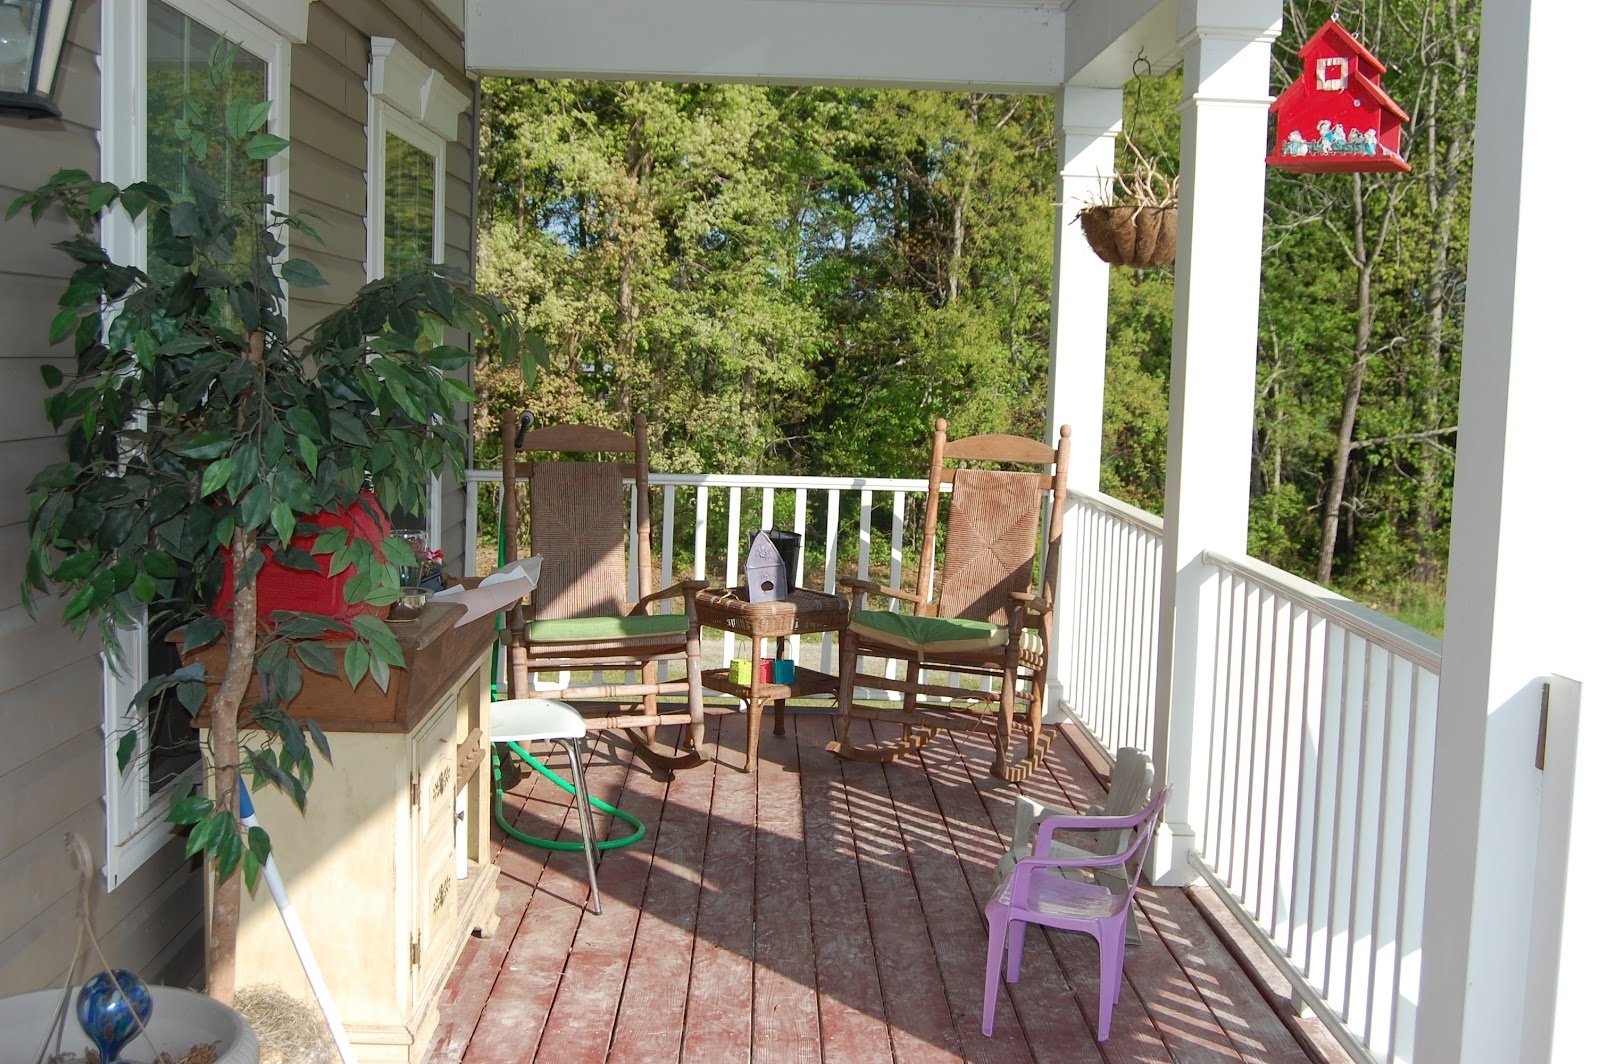 Country Porch Decorating Ideas For Summer